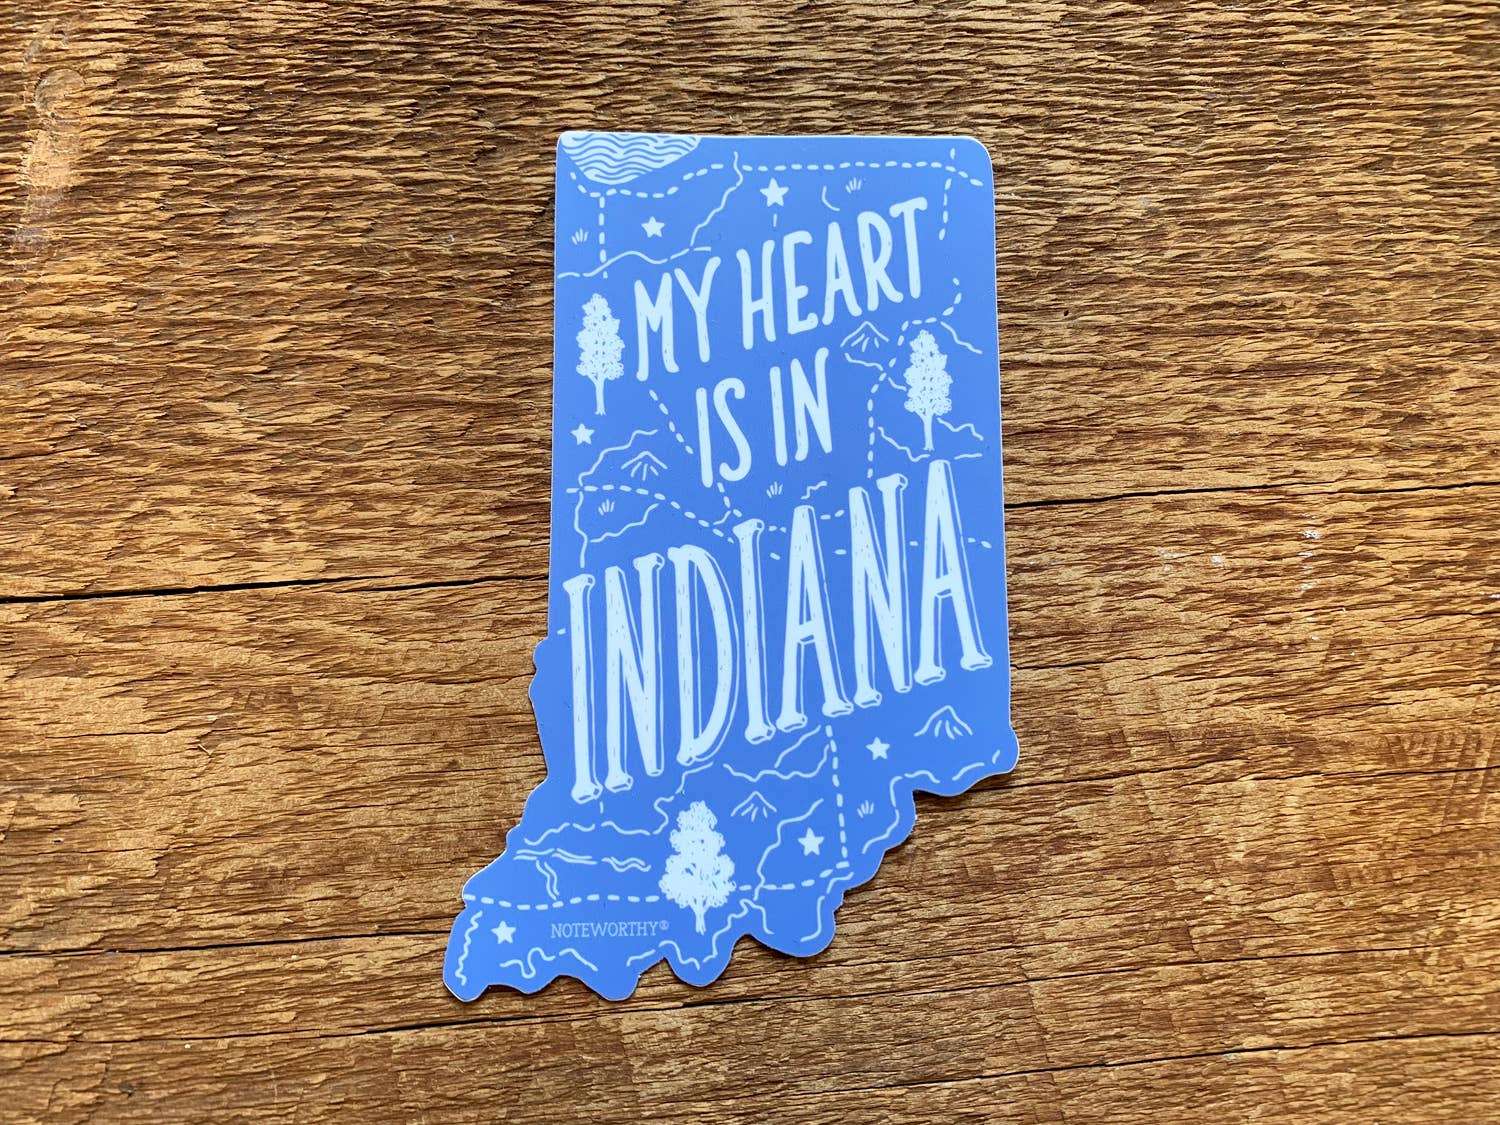 Indiana Sticker | My Heart is in Indiana - InRugCo Studio & Gift Shop